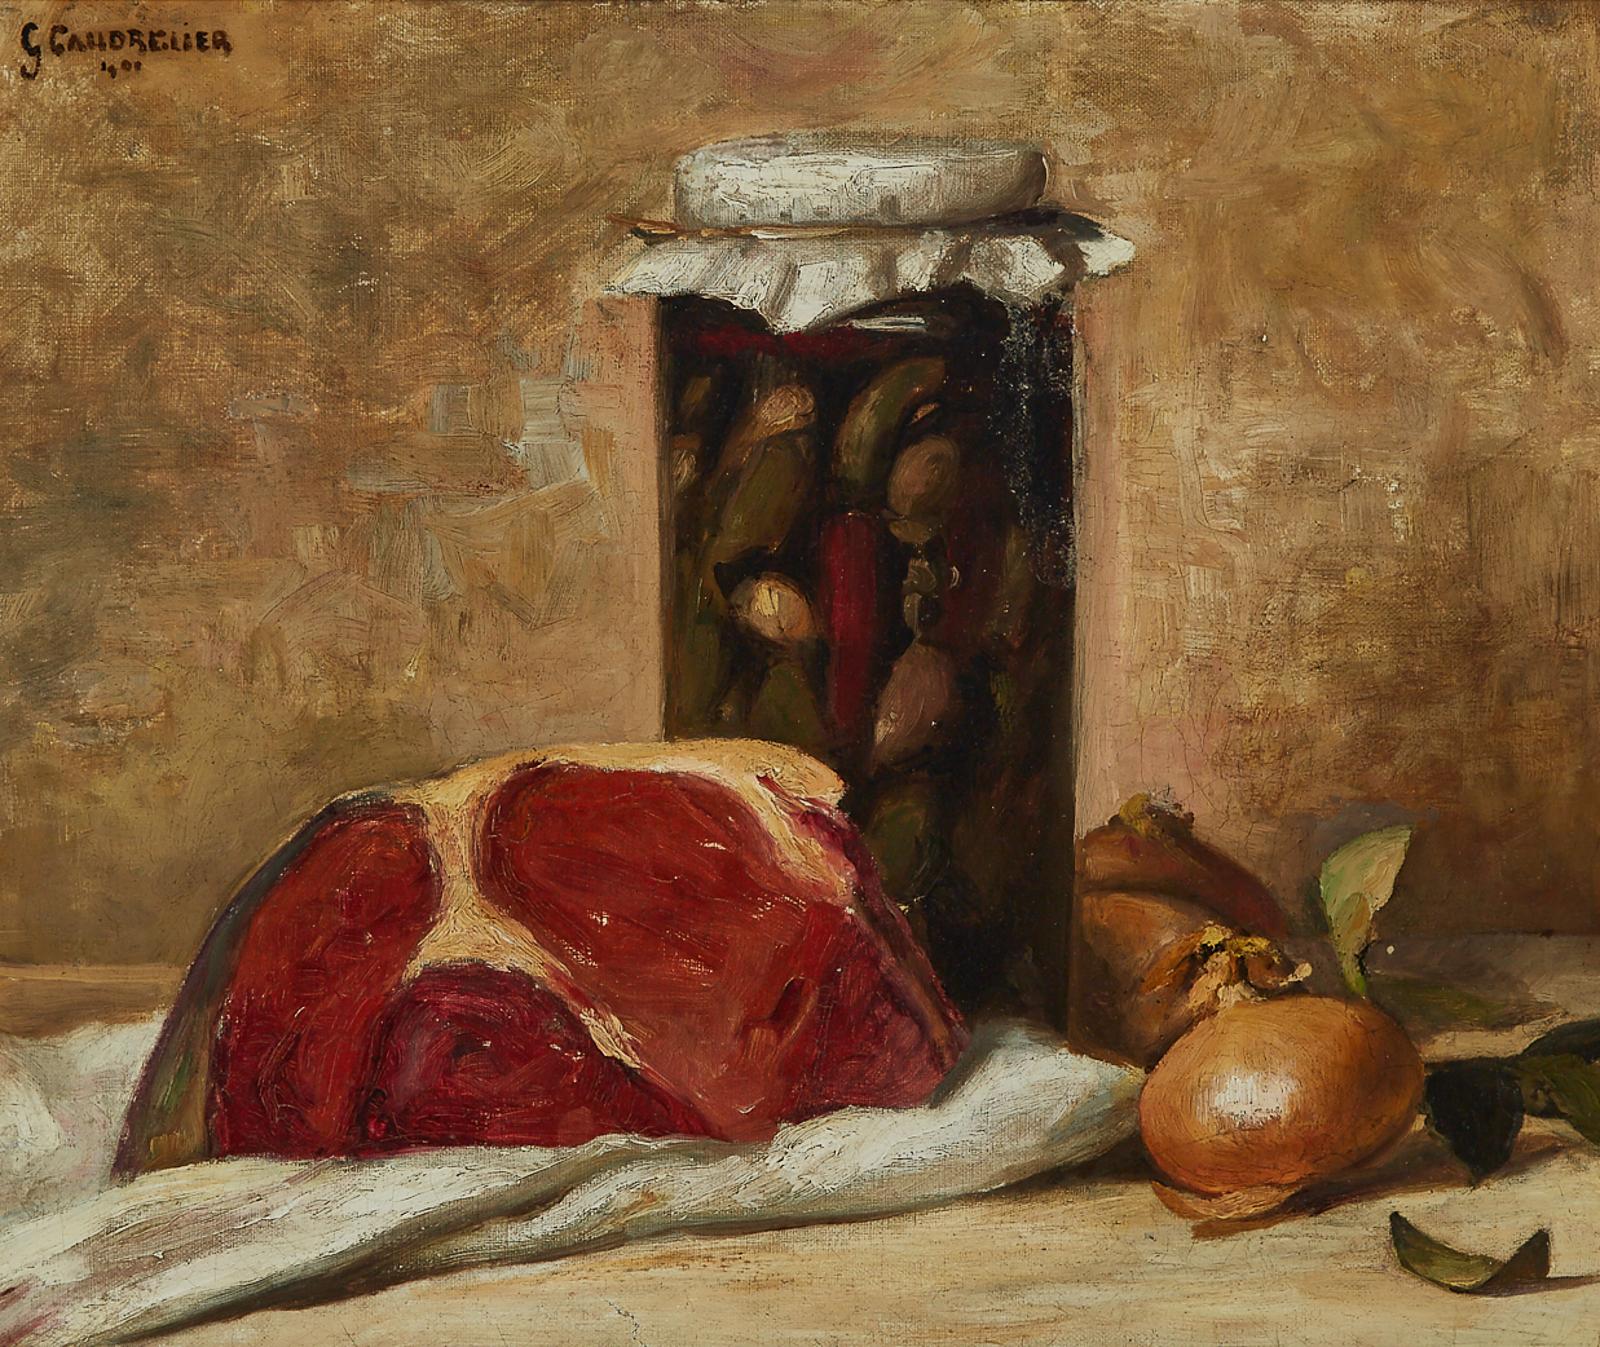 Gérard Caudrelier - Still Life With Meat, Onions And Preserved Pickles, 1901